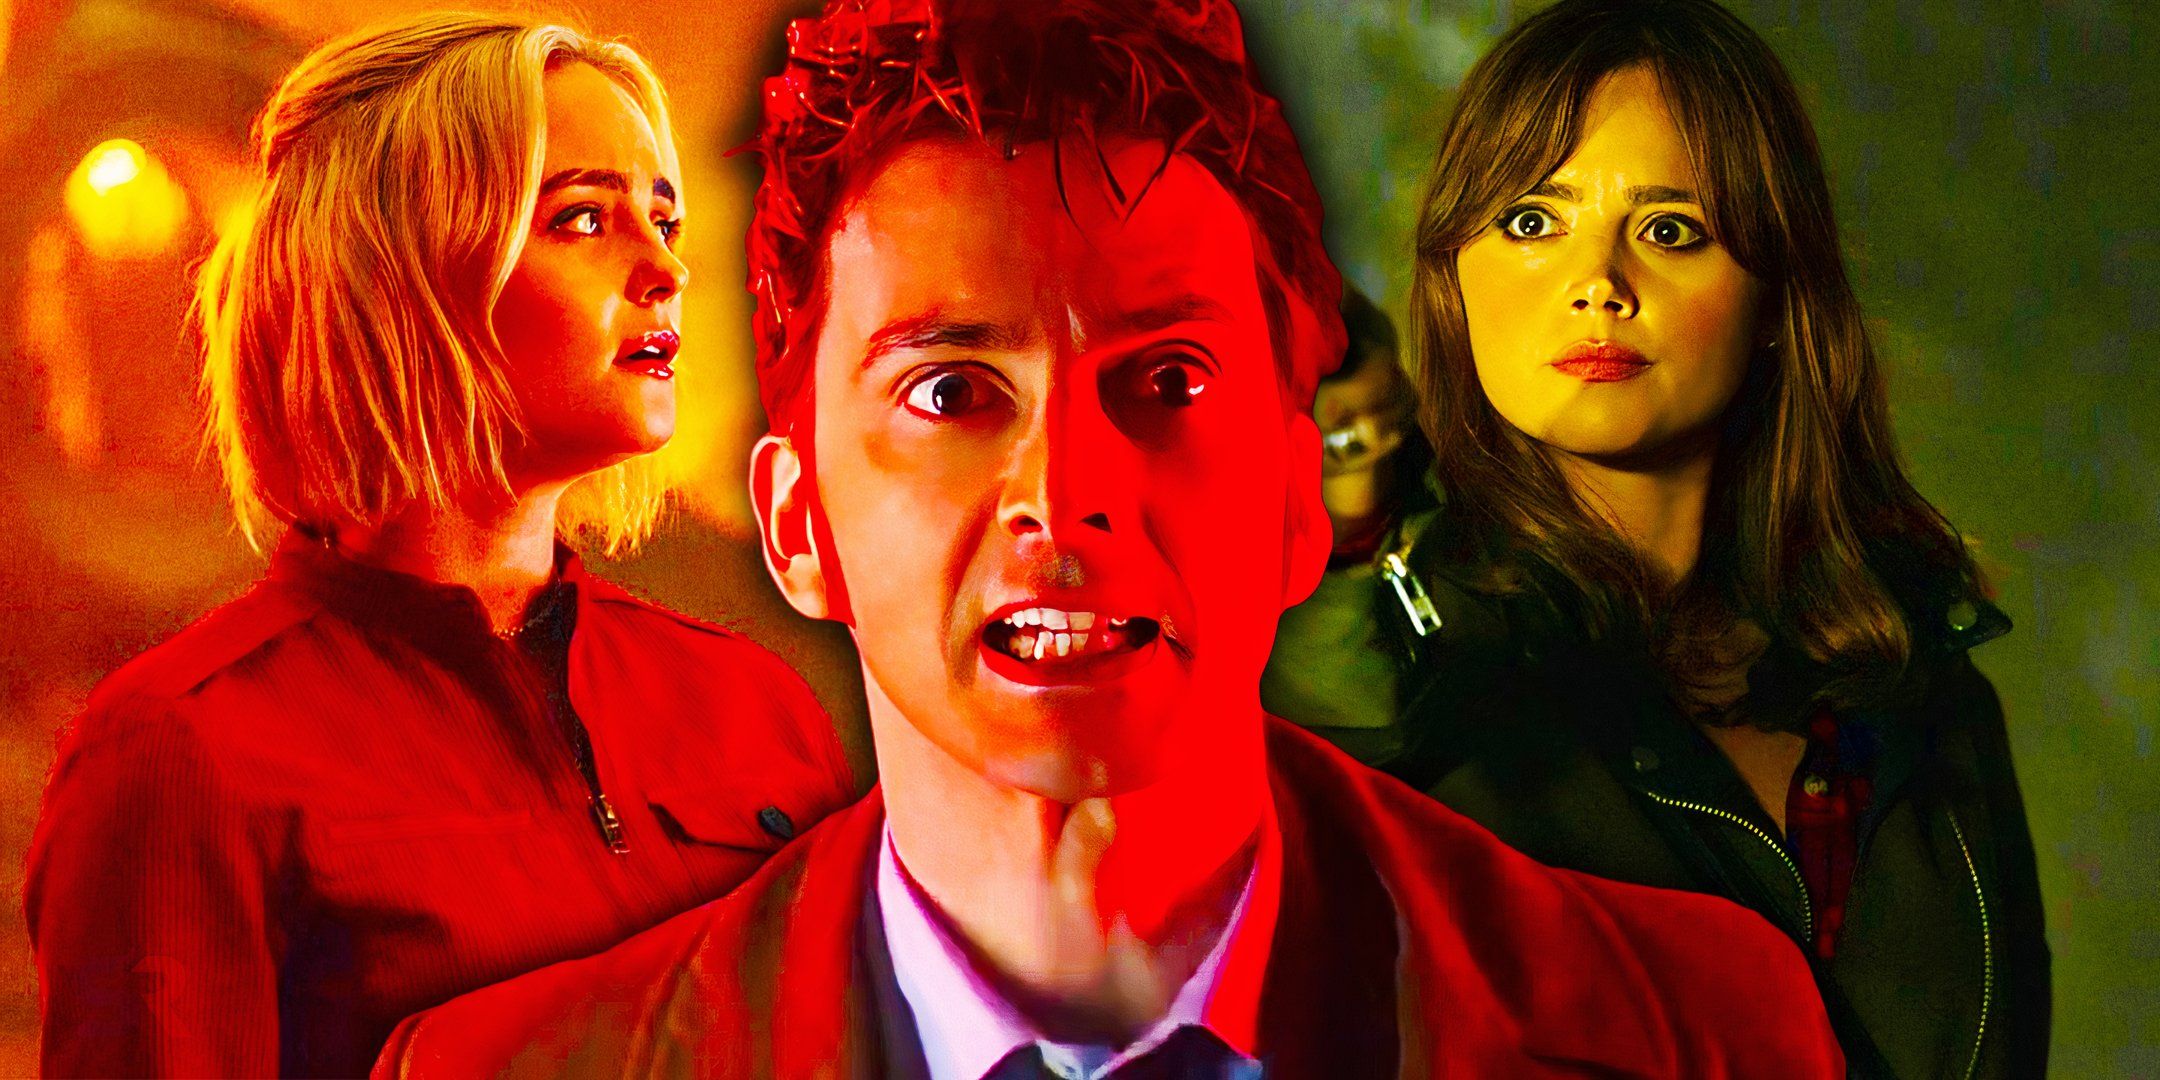 A collage of the Tenth Doctor, Ruby Sunday, and Clara Oswald